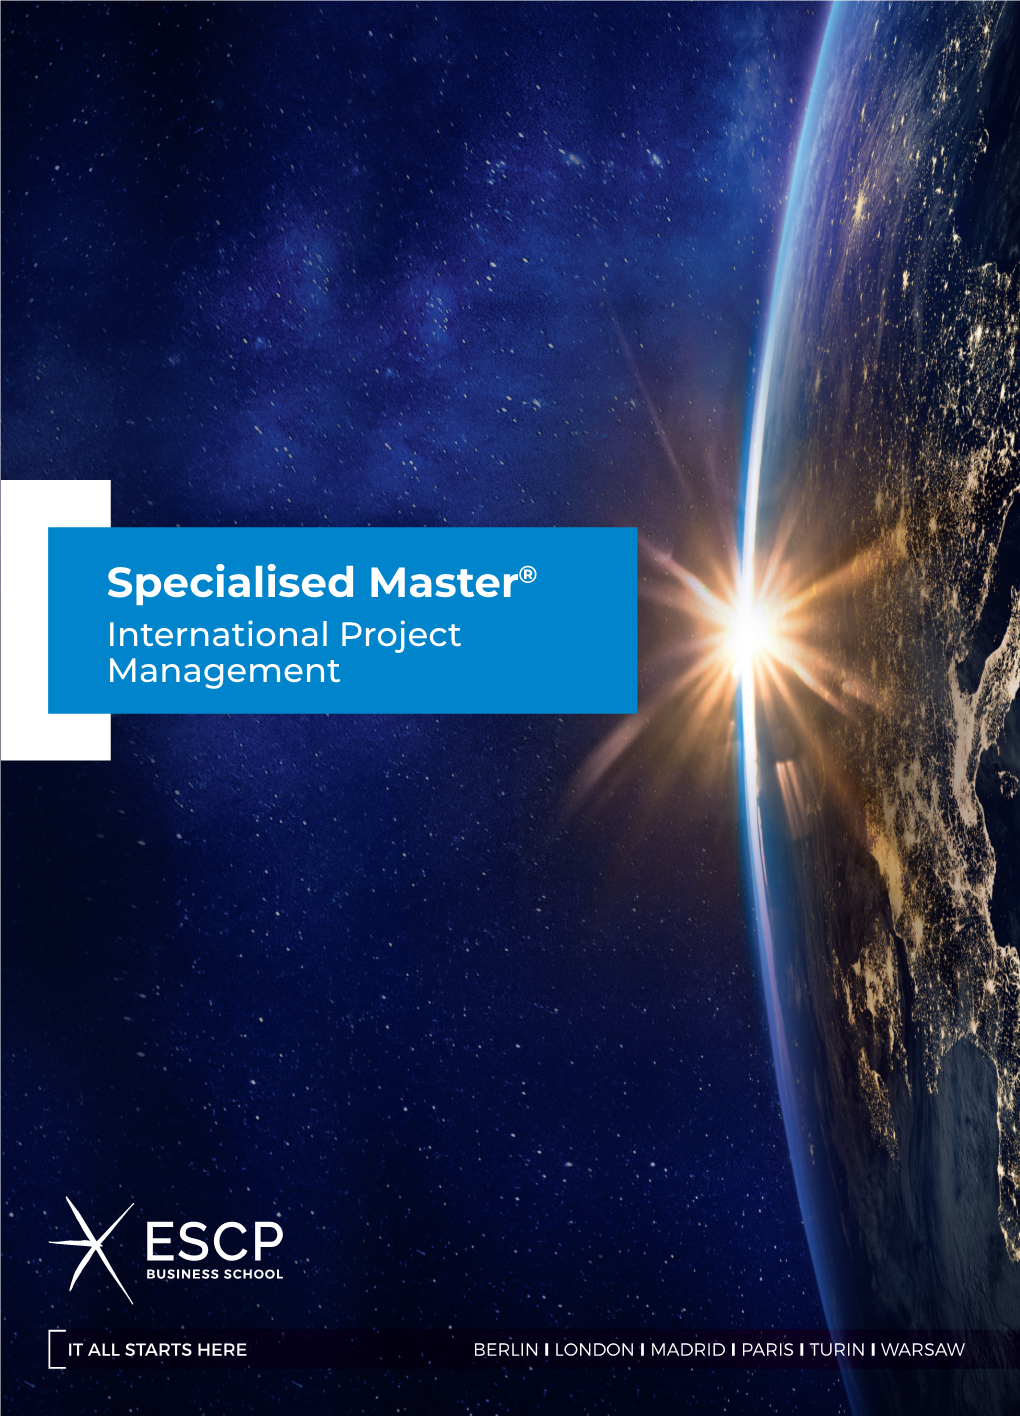 Specialised Master® in International Project Management